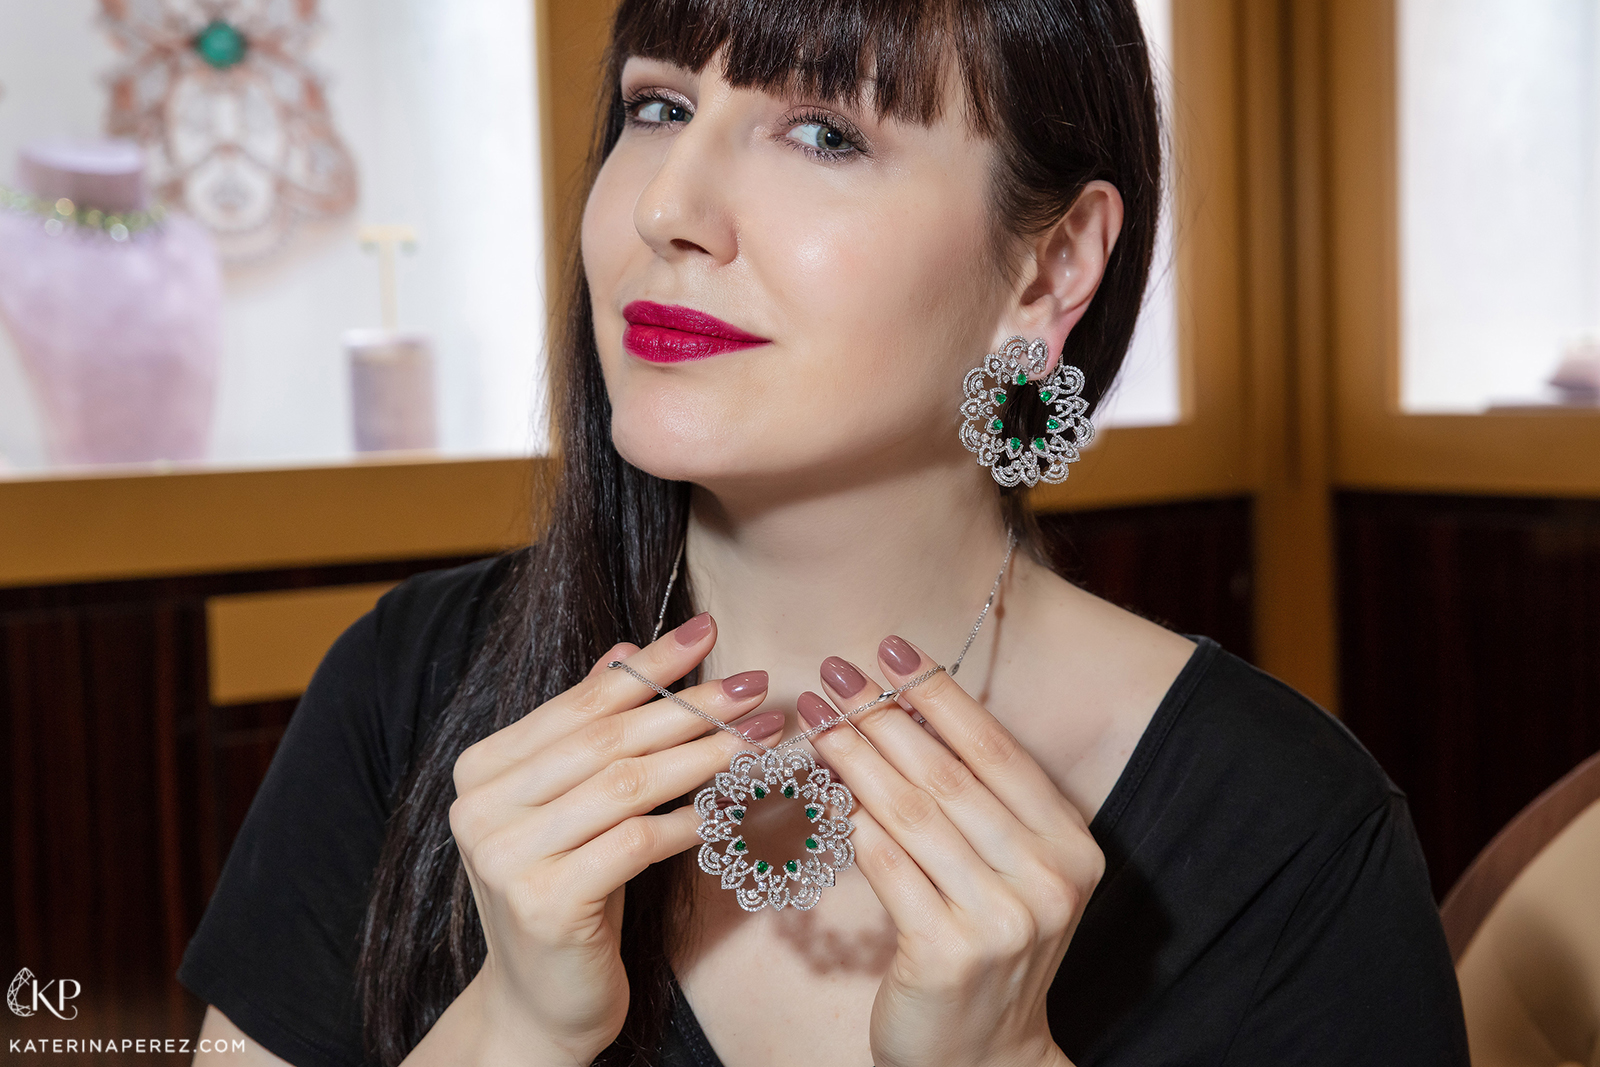 Emerald and diamond jewels from Luvor's exquisite Mandala collection, which resembles openwork lace